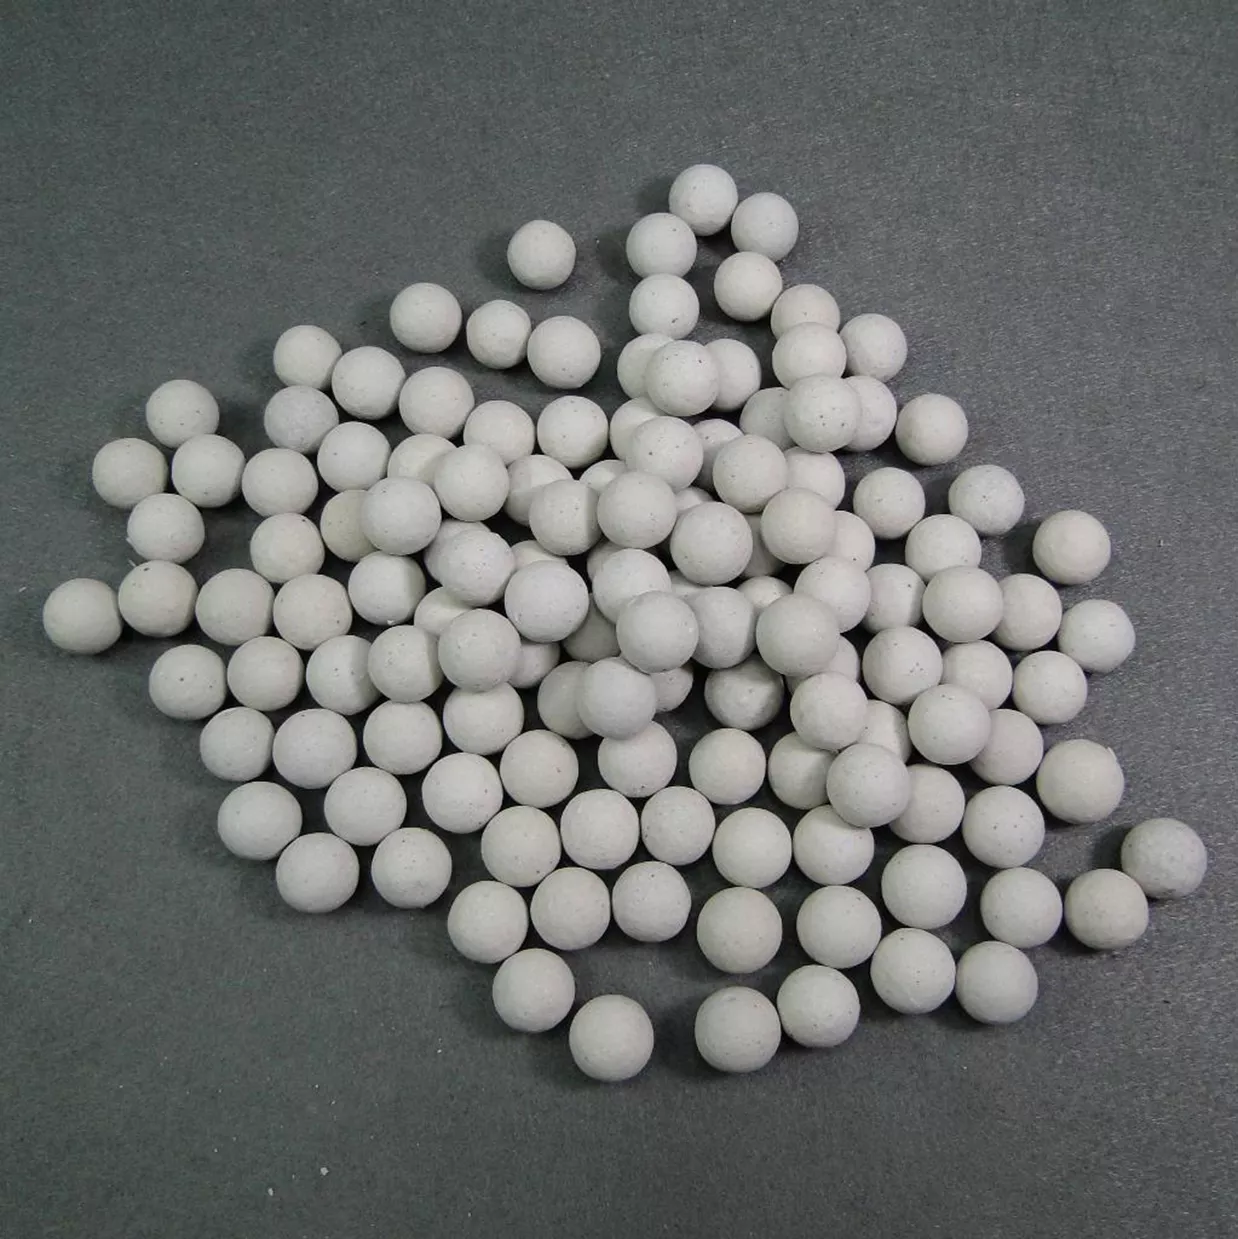 Can Ceramic Alumina Balls be Used in Wet Milling Applications?